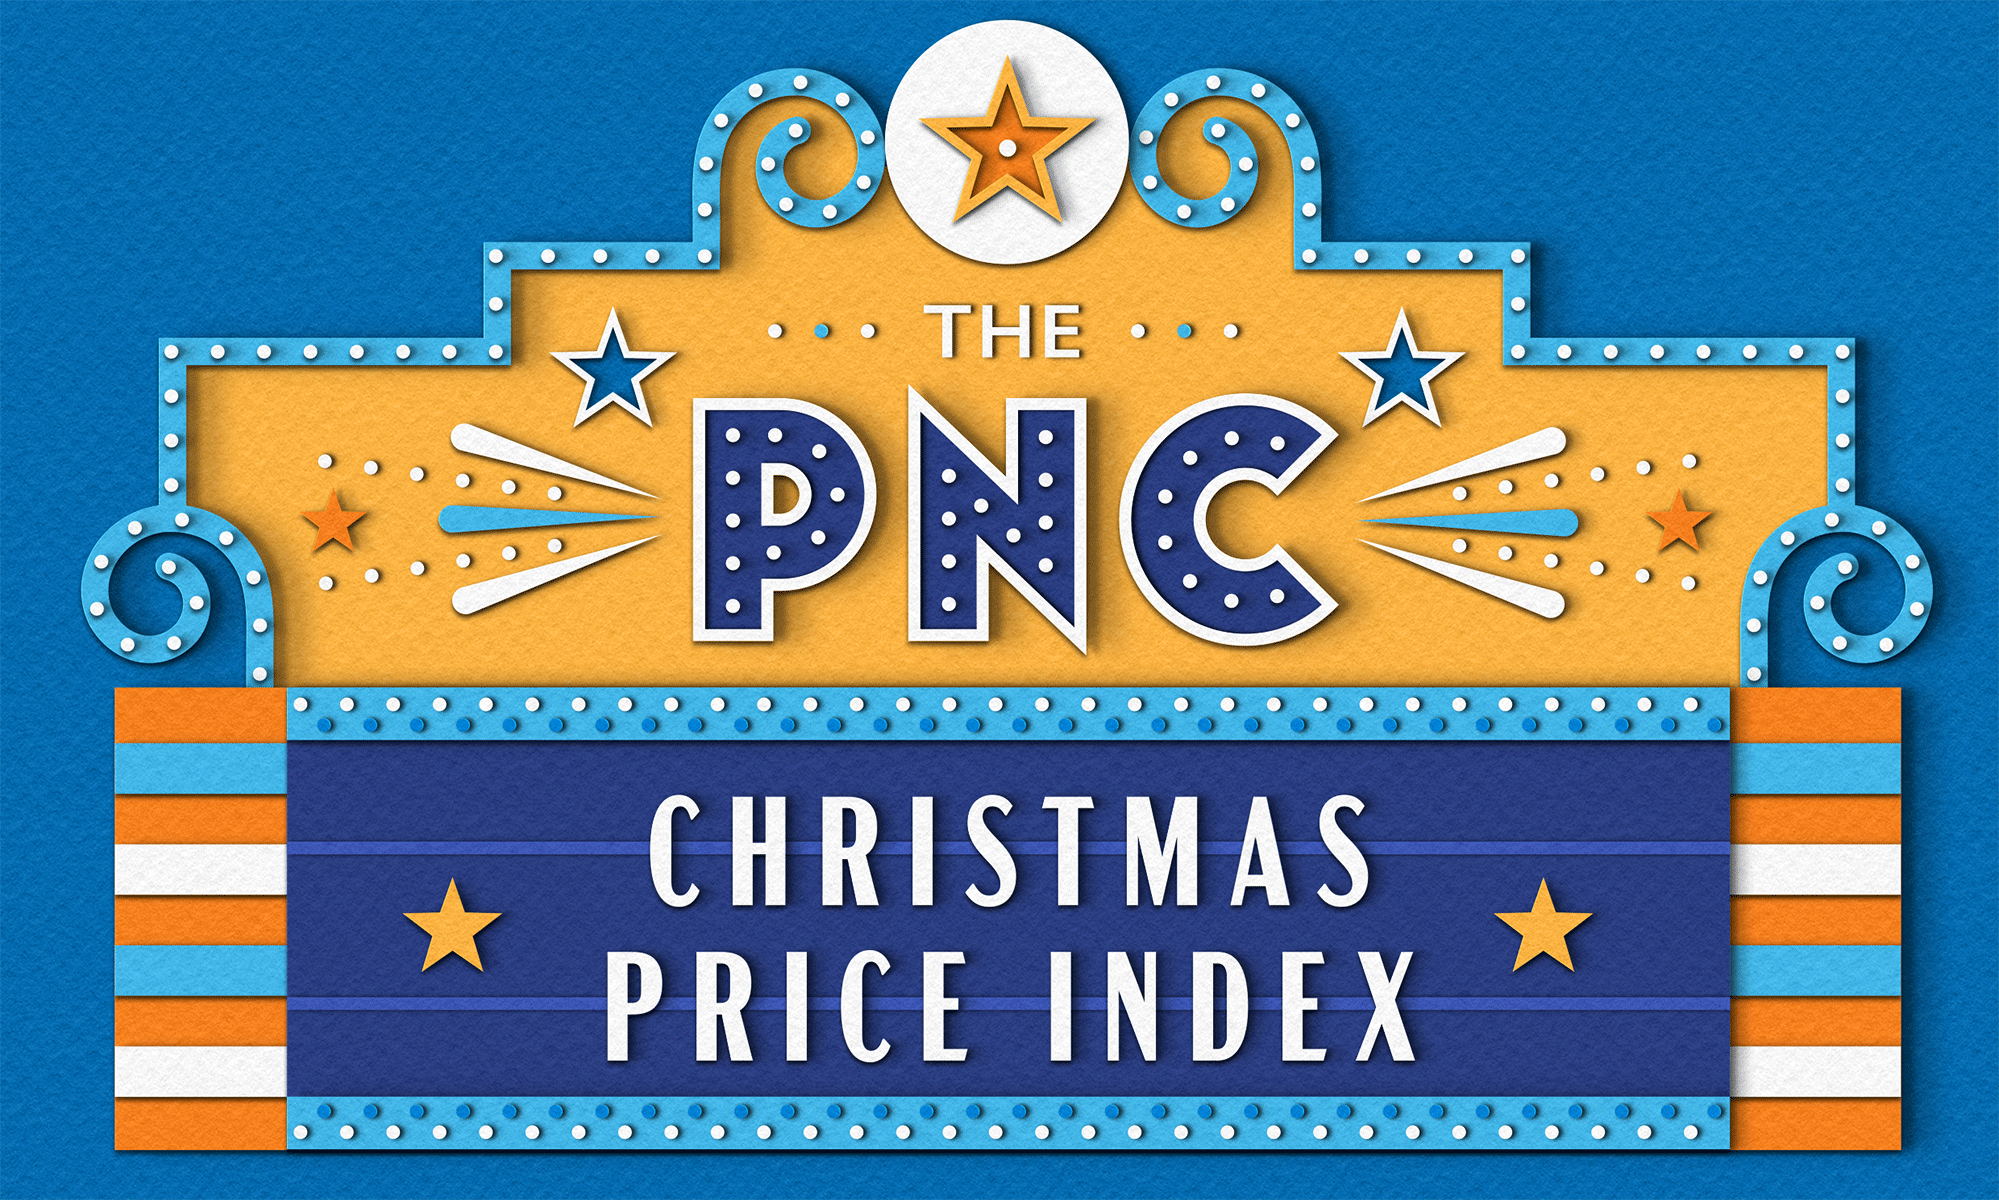 PNC Christmas Price Index 12 days of christmas advertising animals animation bank birds character christmas finance gif graphic design humor illustration money paper art paper cut